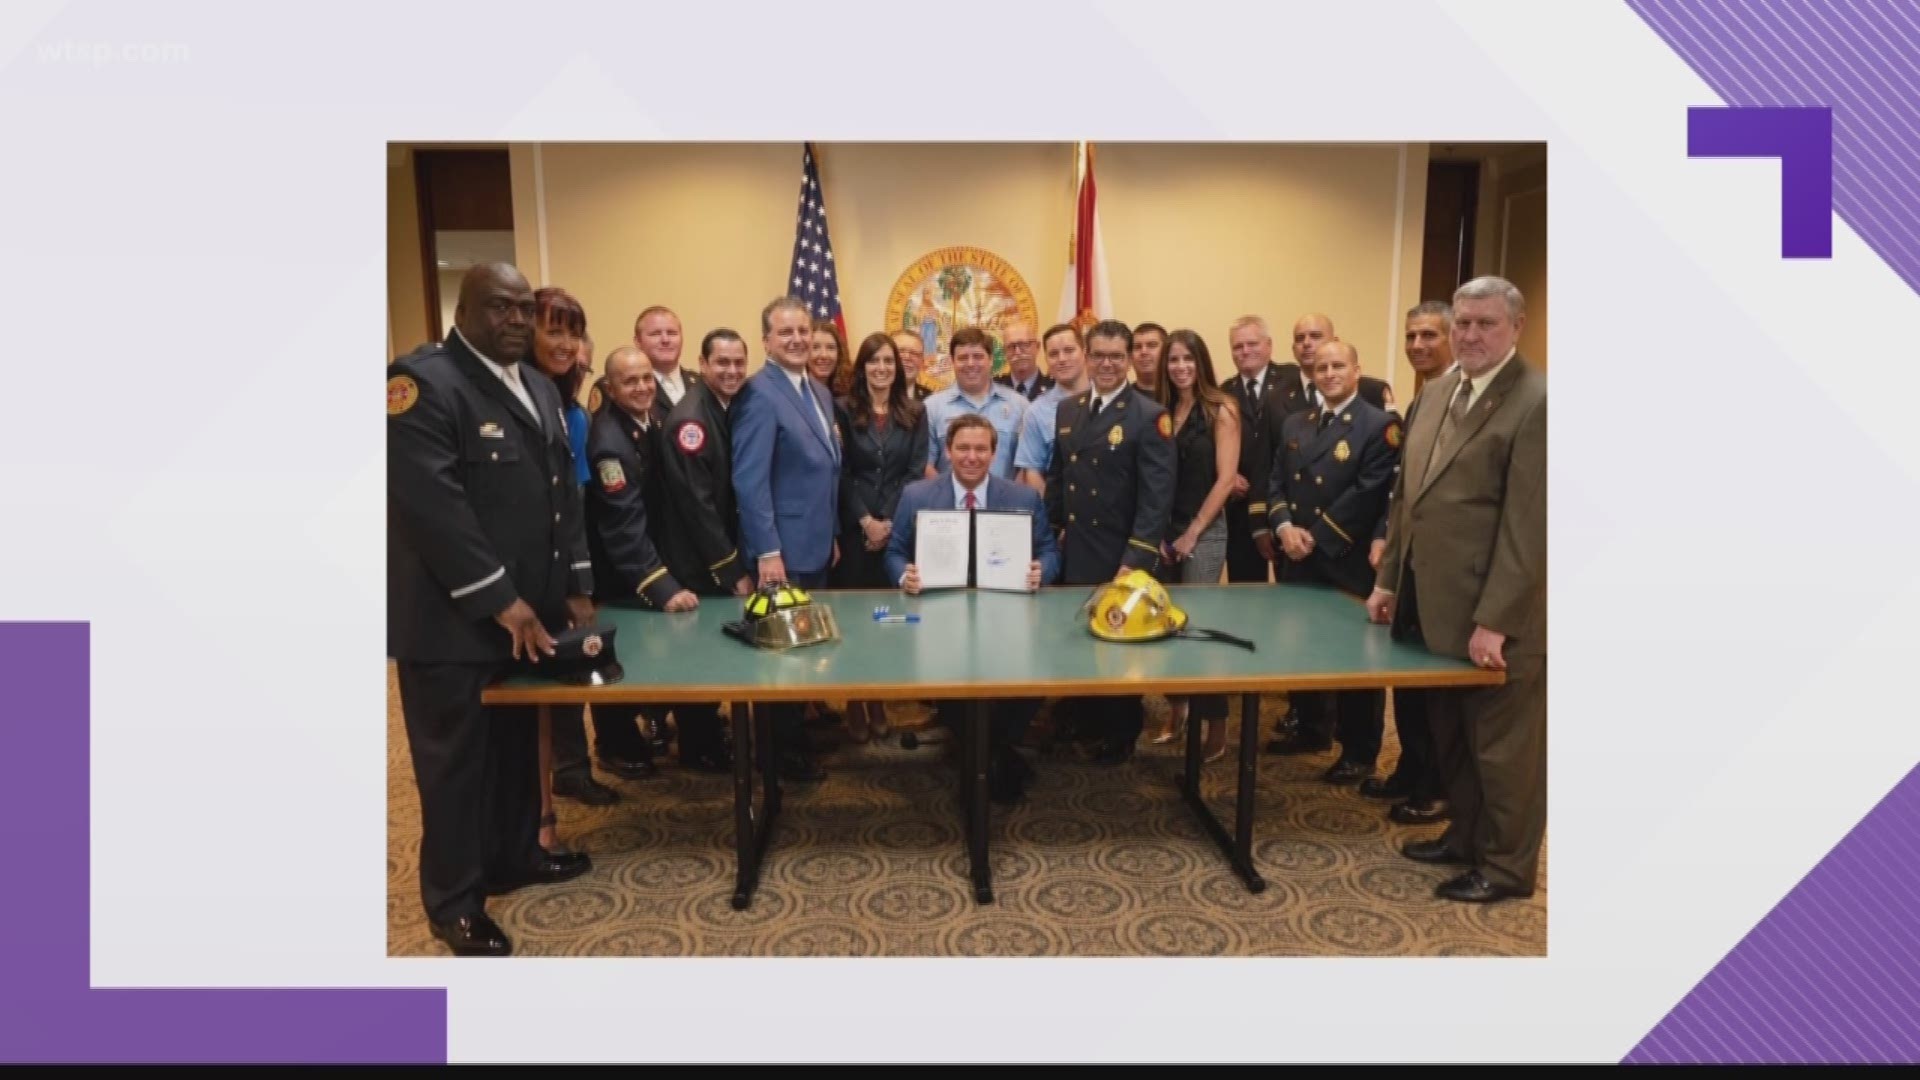 Florida's governor has signed a bill that will guarantee health care benefits to firefighters diagnosed with certain types of cancer, despite pressure for him to veto the legislation.

The Florida League of Cities had criticized the legislation, arguing making local governments help pay for the coverage is unfair. Counties will be responsible for the majority of costs, an estimated $3 million collectively statewide. And, the state will pay about $920,000. 

This week, Florida Chief Financial Officer Jimmy Patronis said he couldn't believe the league "had the audacity" to ask Gov. Ron DeSantis to veto the bill. And, the governor appeared to agree -- going forward with signing it into law.

The legislation will allow for certain disability payments to firefighters and death benefits to their families if they die as a result of cancer or cancer treatments. The law cuts out the need for firefighters to file workman's comp claims in some instances. 

Similar legislation has been introduced for years but to no avail. Advocates for the bill had said cancer is considered the most dangerous threat for full-time firefighters. 

According to the International Association of Fire Fighters, cancer caused 61 percent of line-of-duty deaths. Firefighters have a 9 percent higher risk of being diagnosed with cancer and are 14 percent more likely to die from it than the general public, according to The National Institute for Occupational Health and Safety.